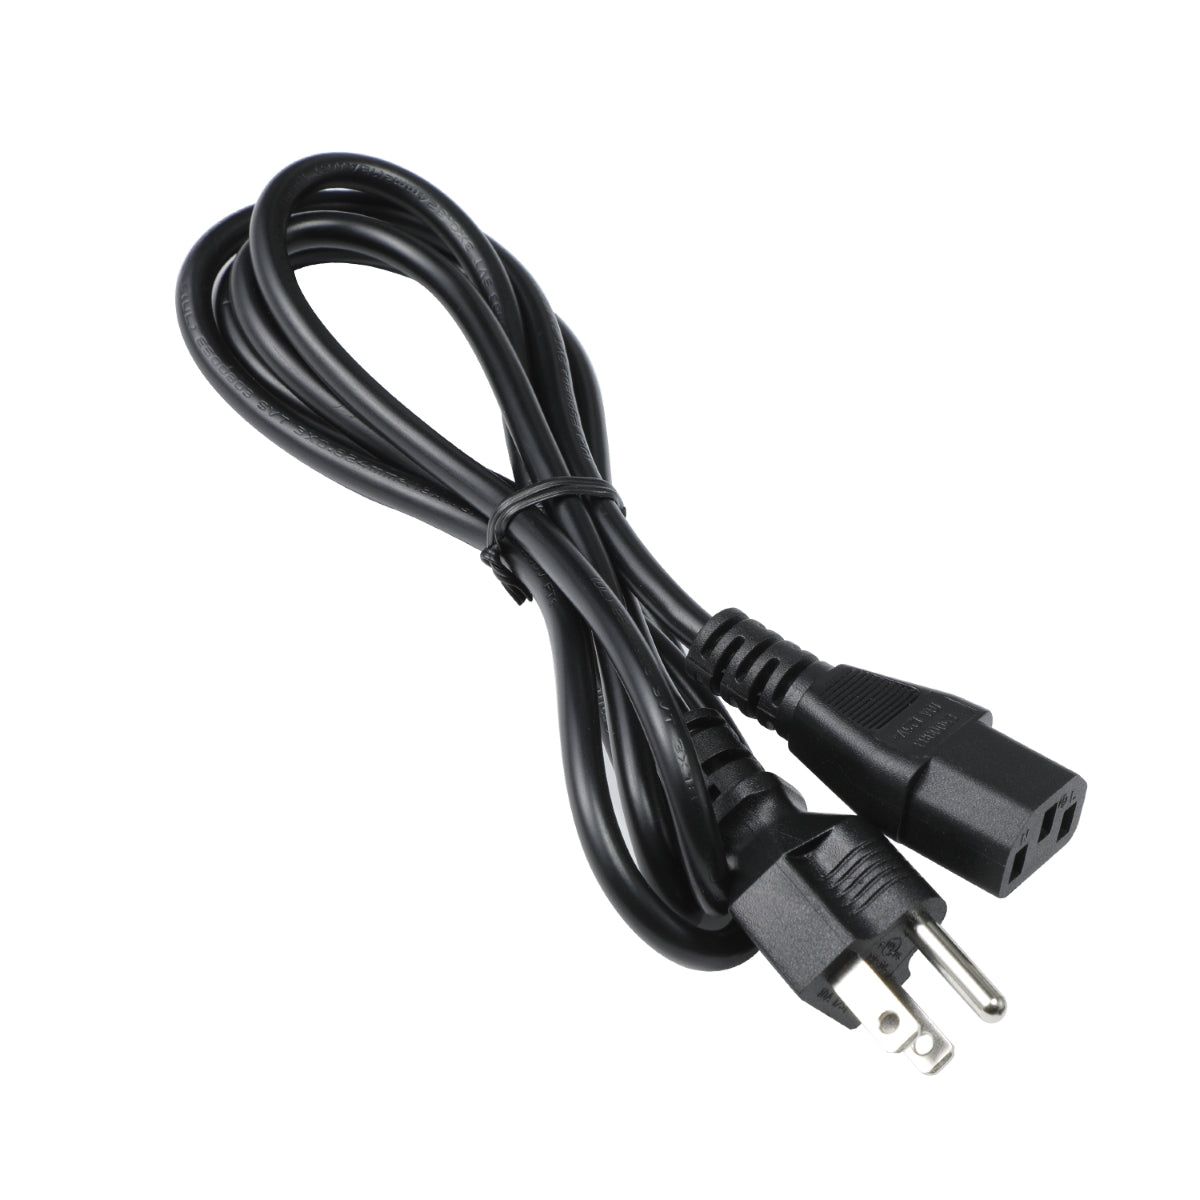 Power Cord for Dell SE2416H Monitor.